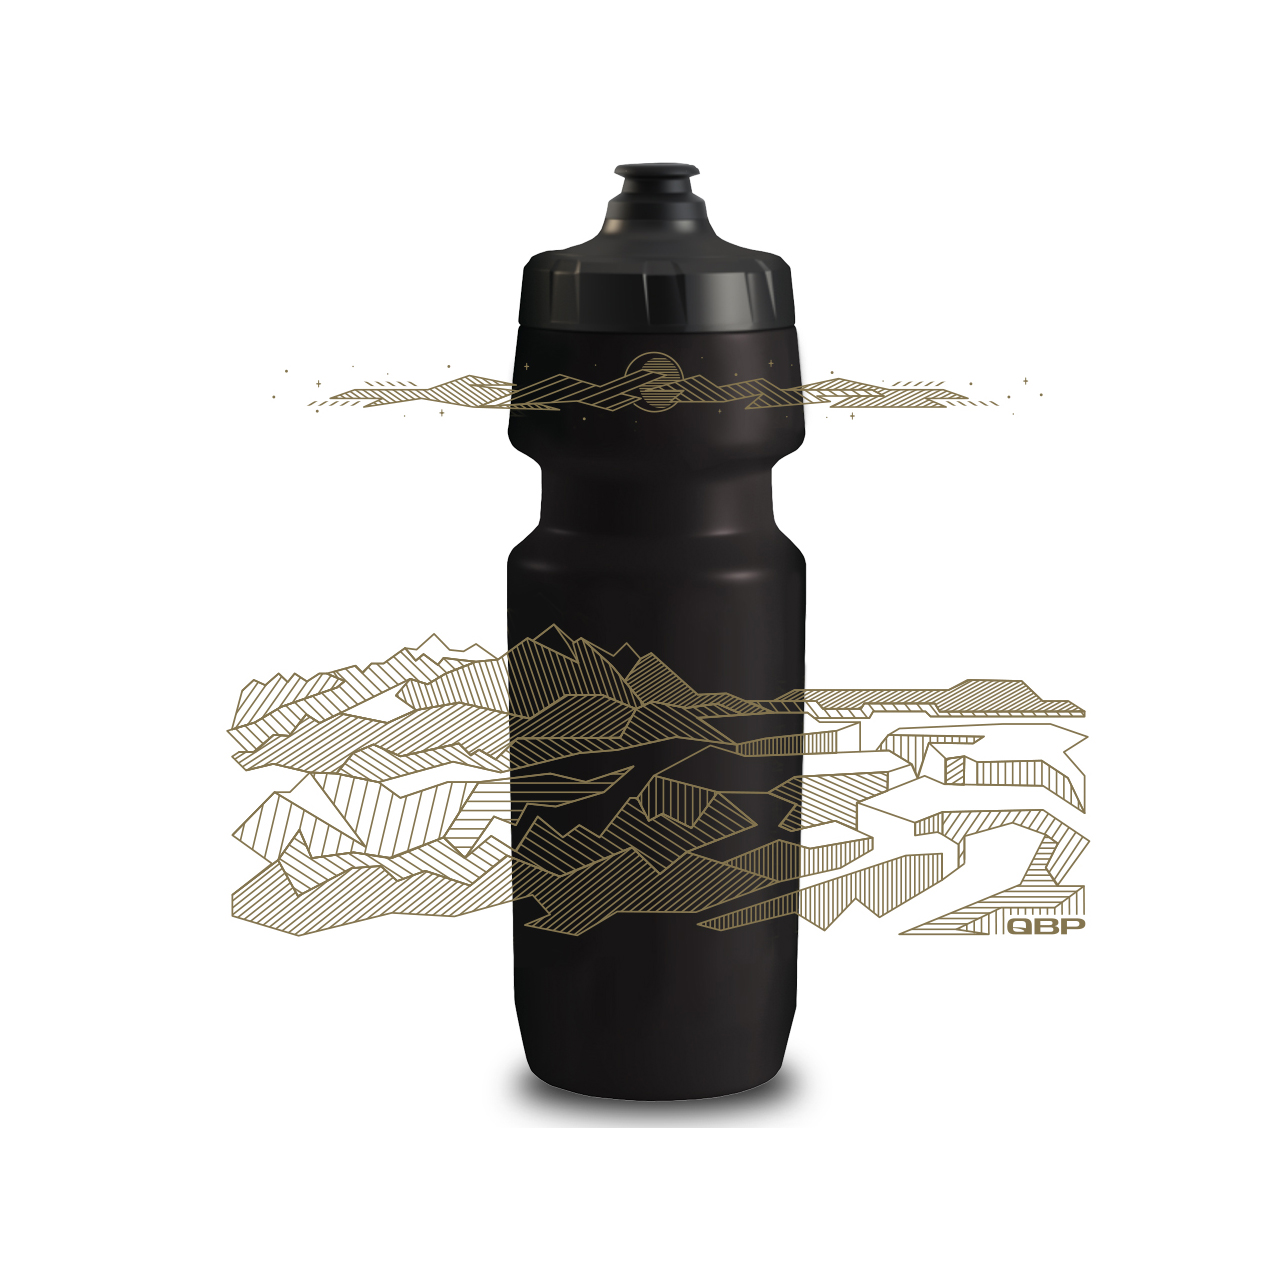 AWC_Site_Designs_Layers_0015_Canyon_Bottle_Spread